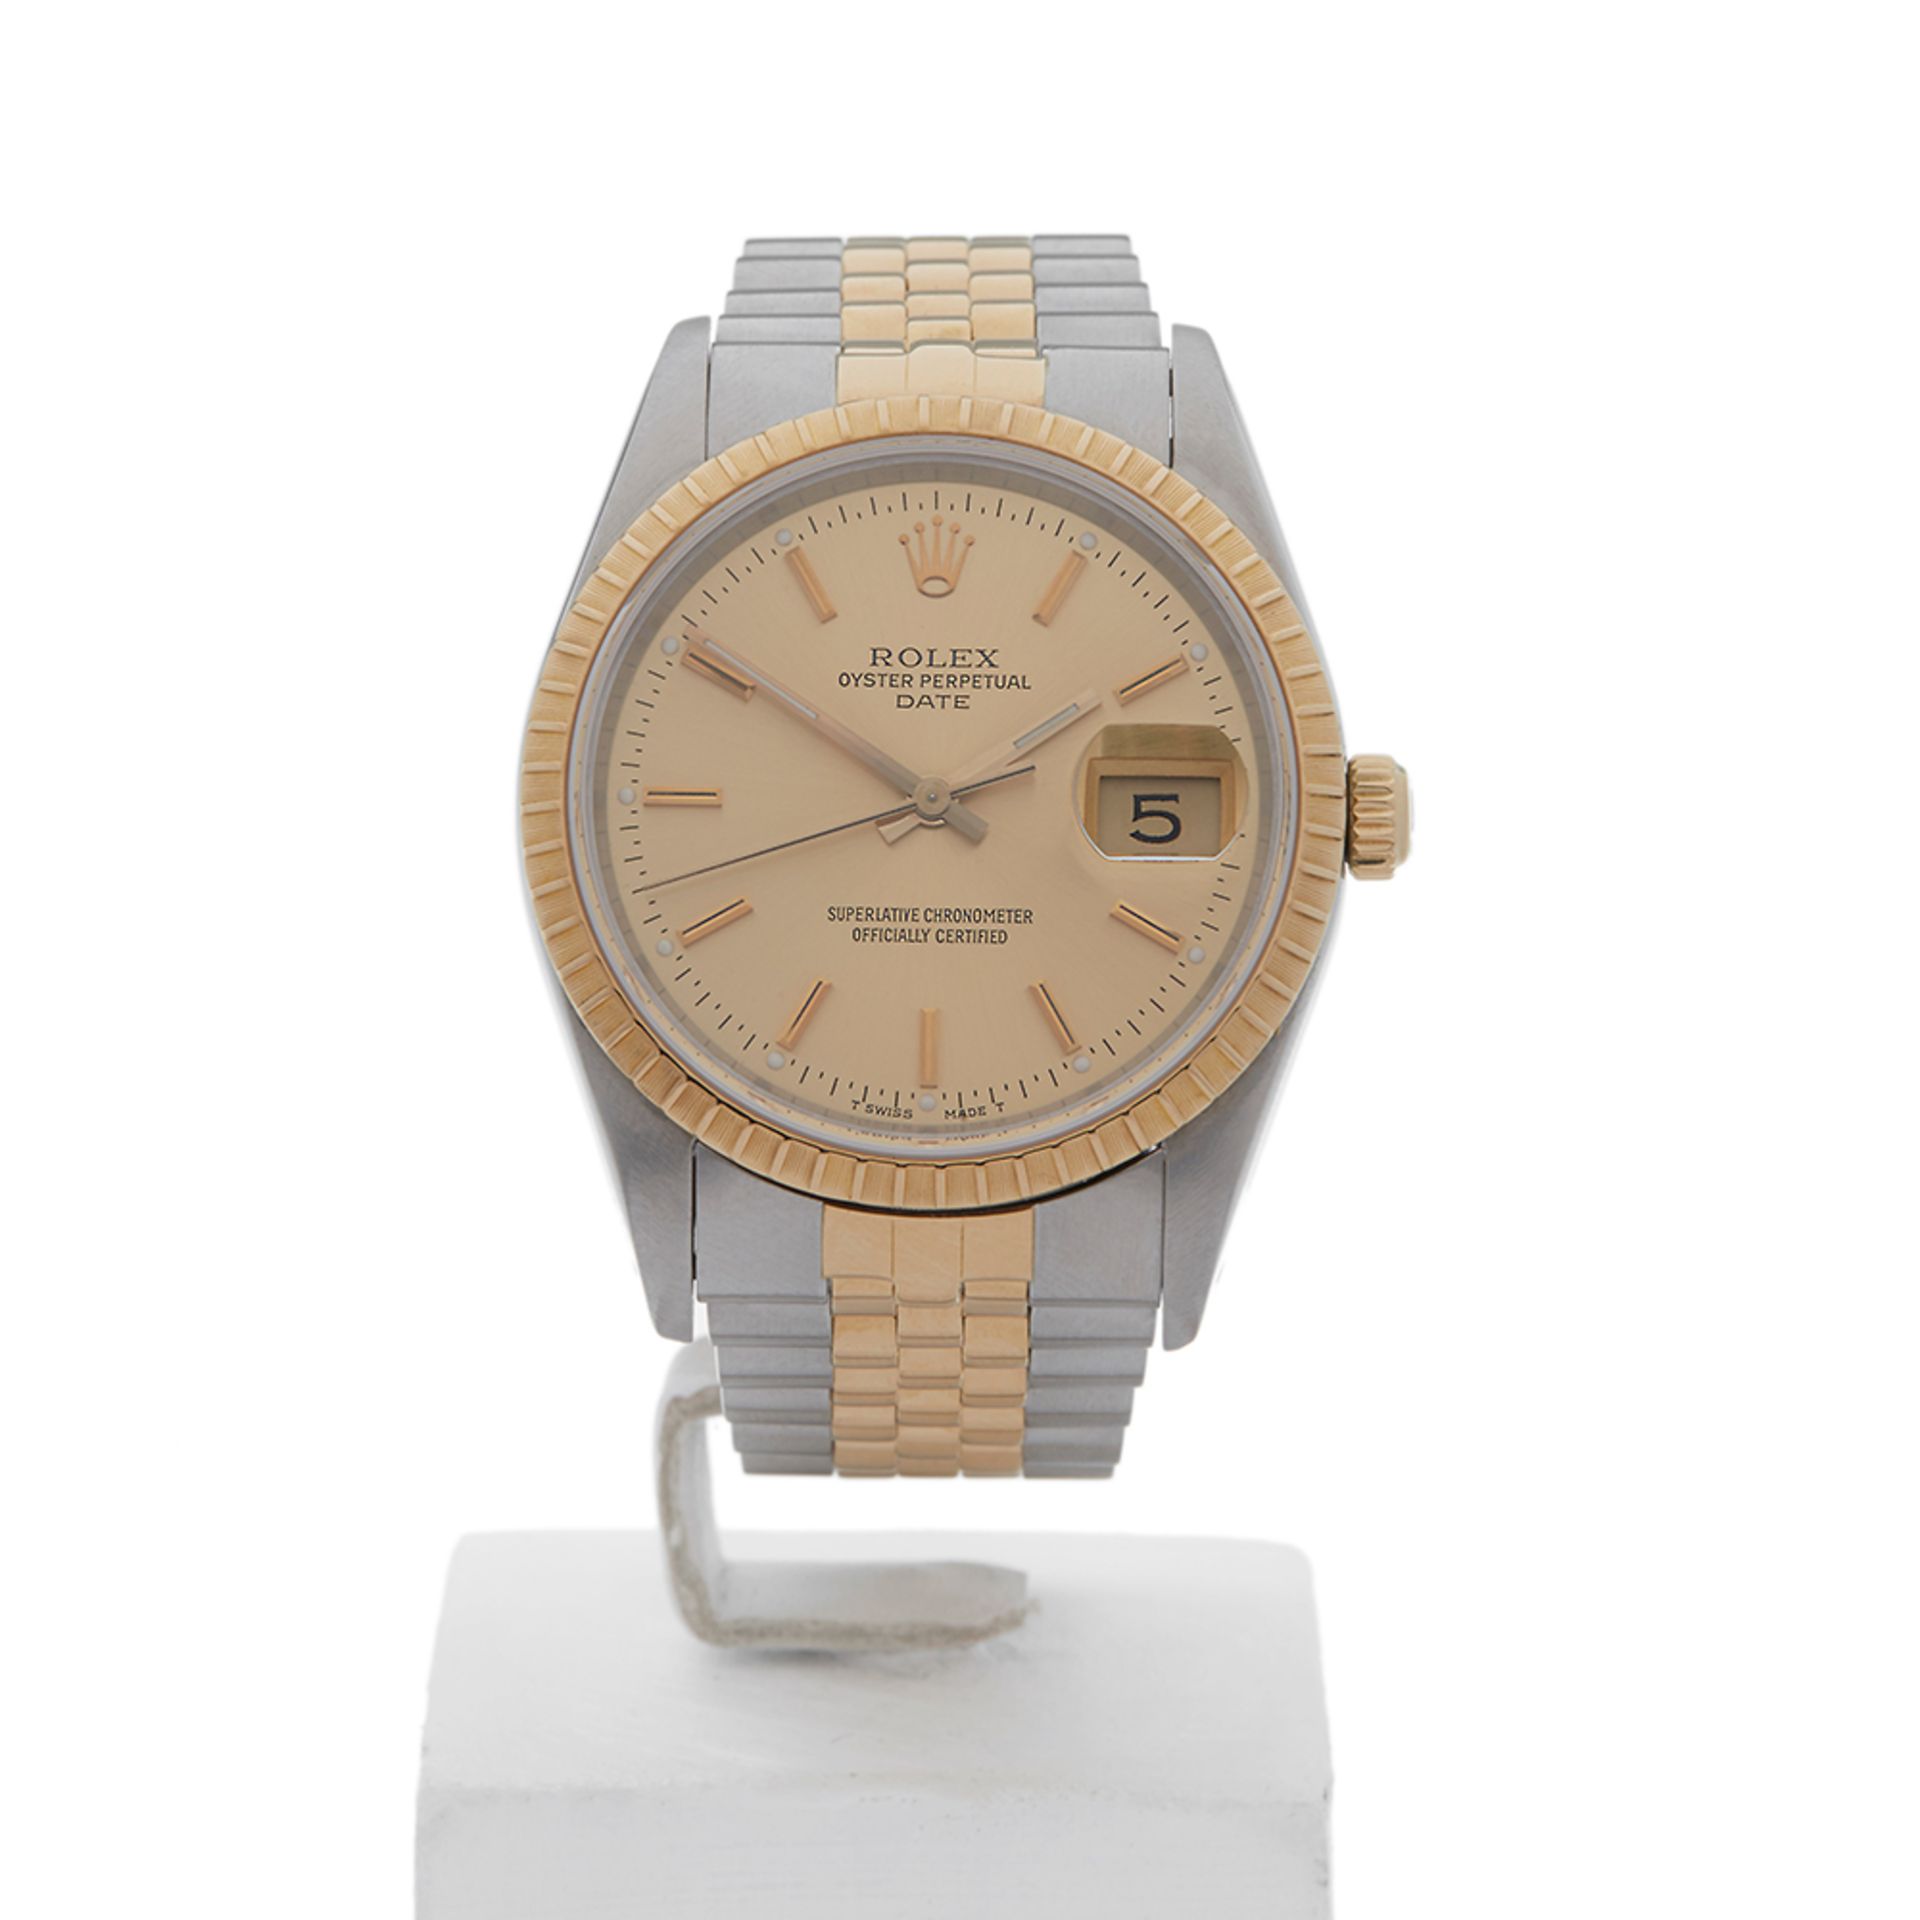 Oyster Perpetual Date 36mm Stainless Steel & 18k Yellow Gold 15233 - Image 2 of 8